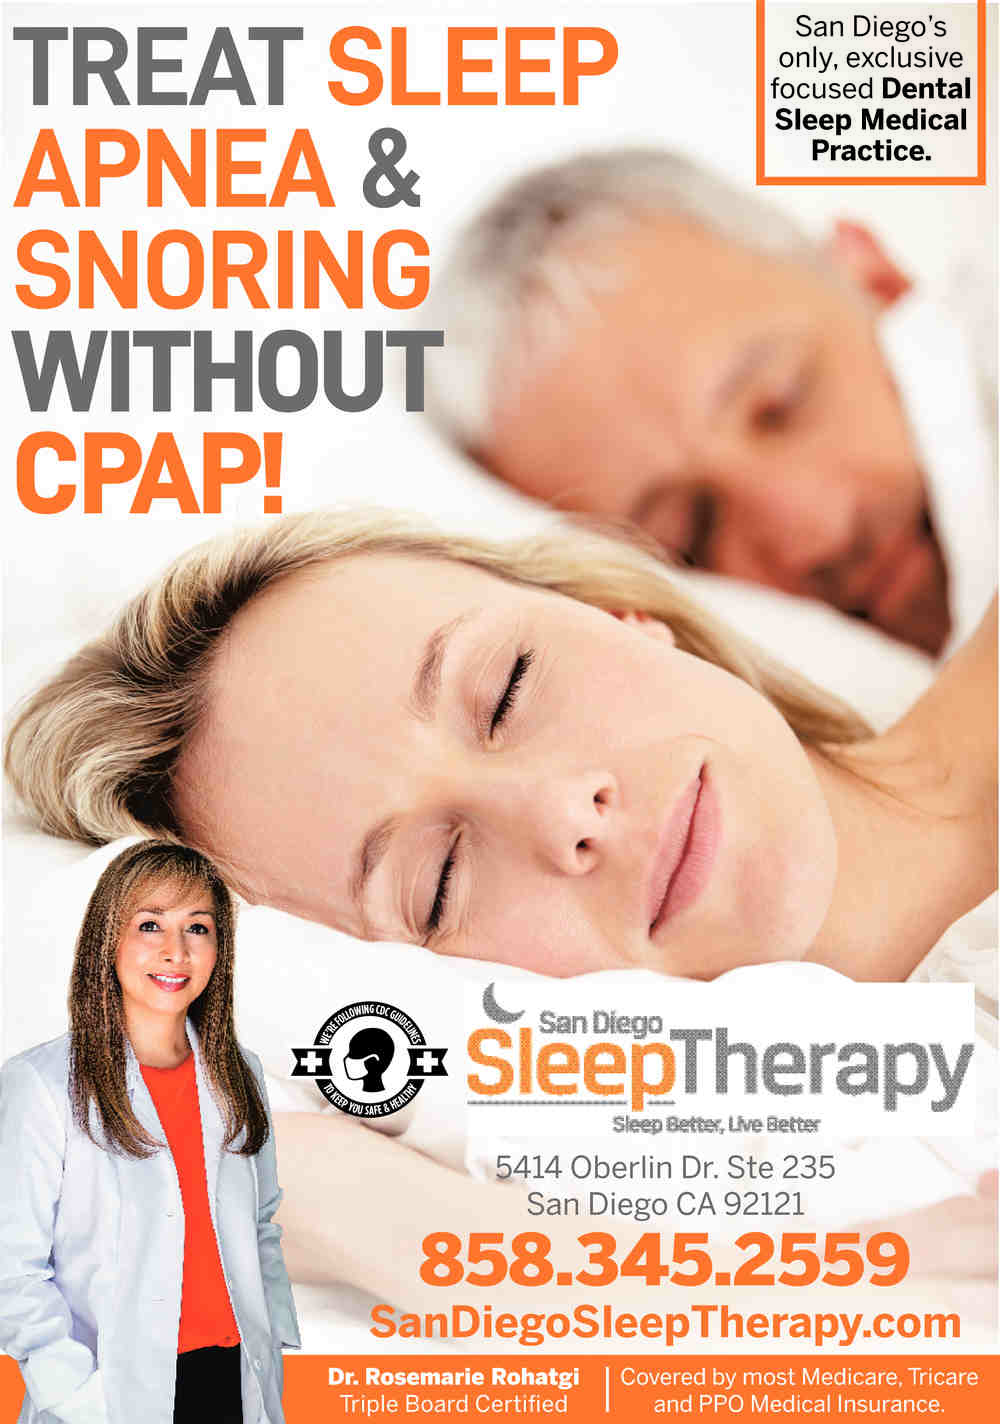 Can a dentist help with snoring?